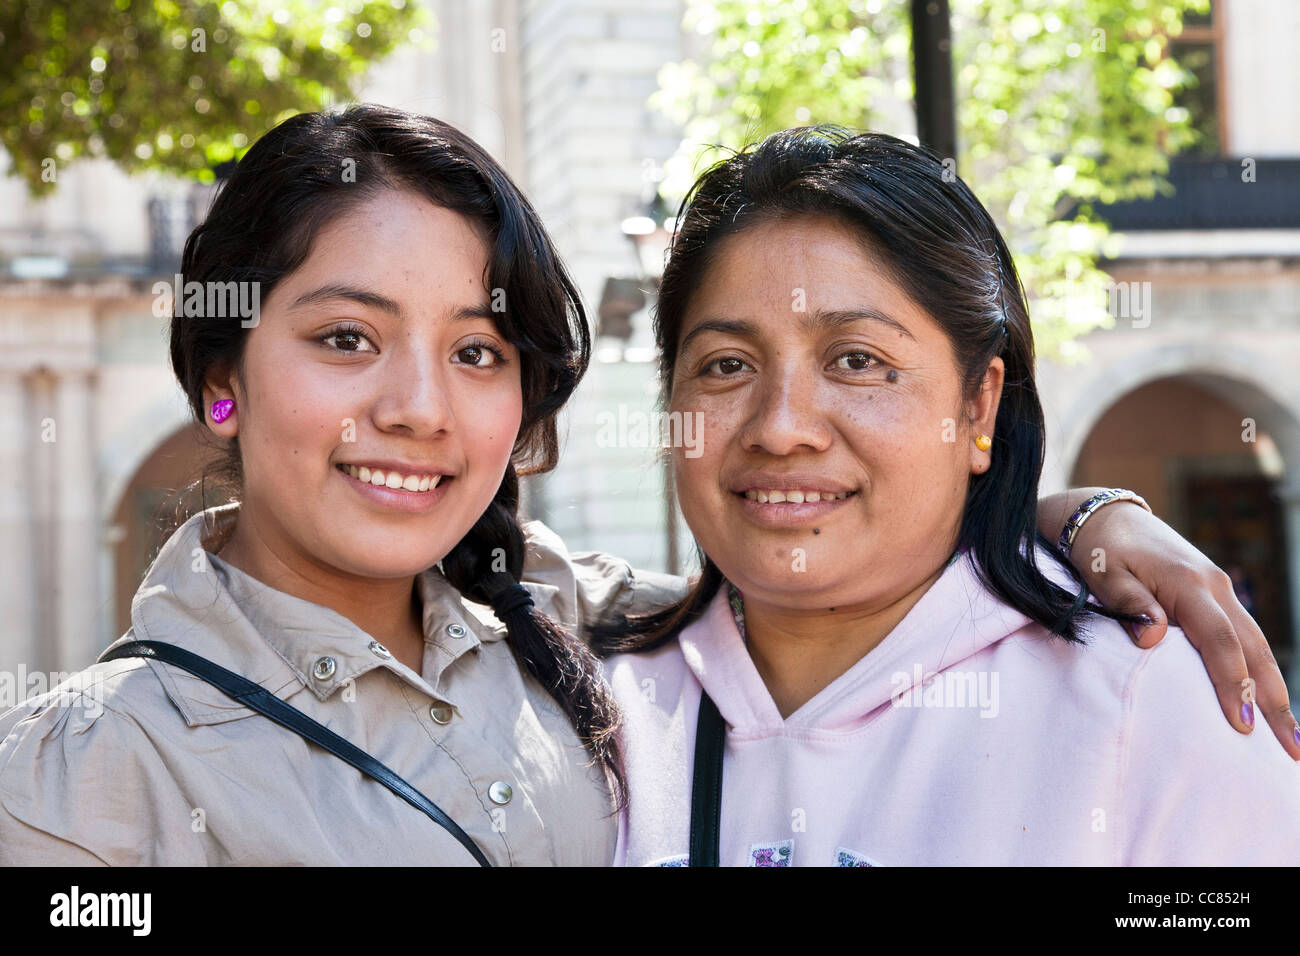 pretty smiling bright eyed Mexican teenager poses for affectionate street portrait with her mother in Oaxaca Zocalo Mexico Stock Photo